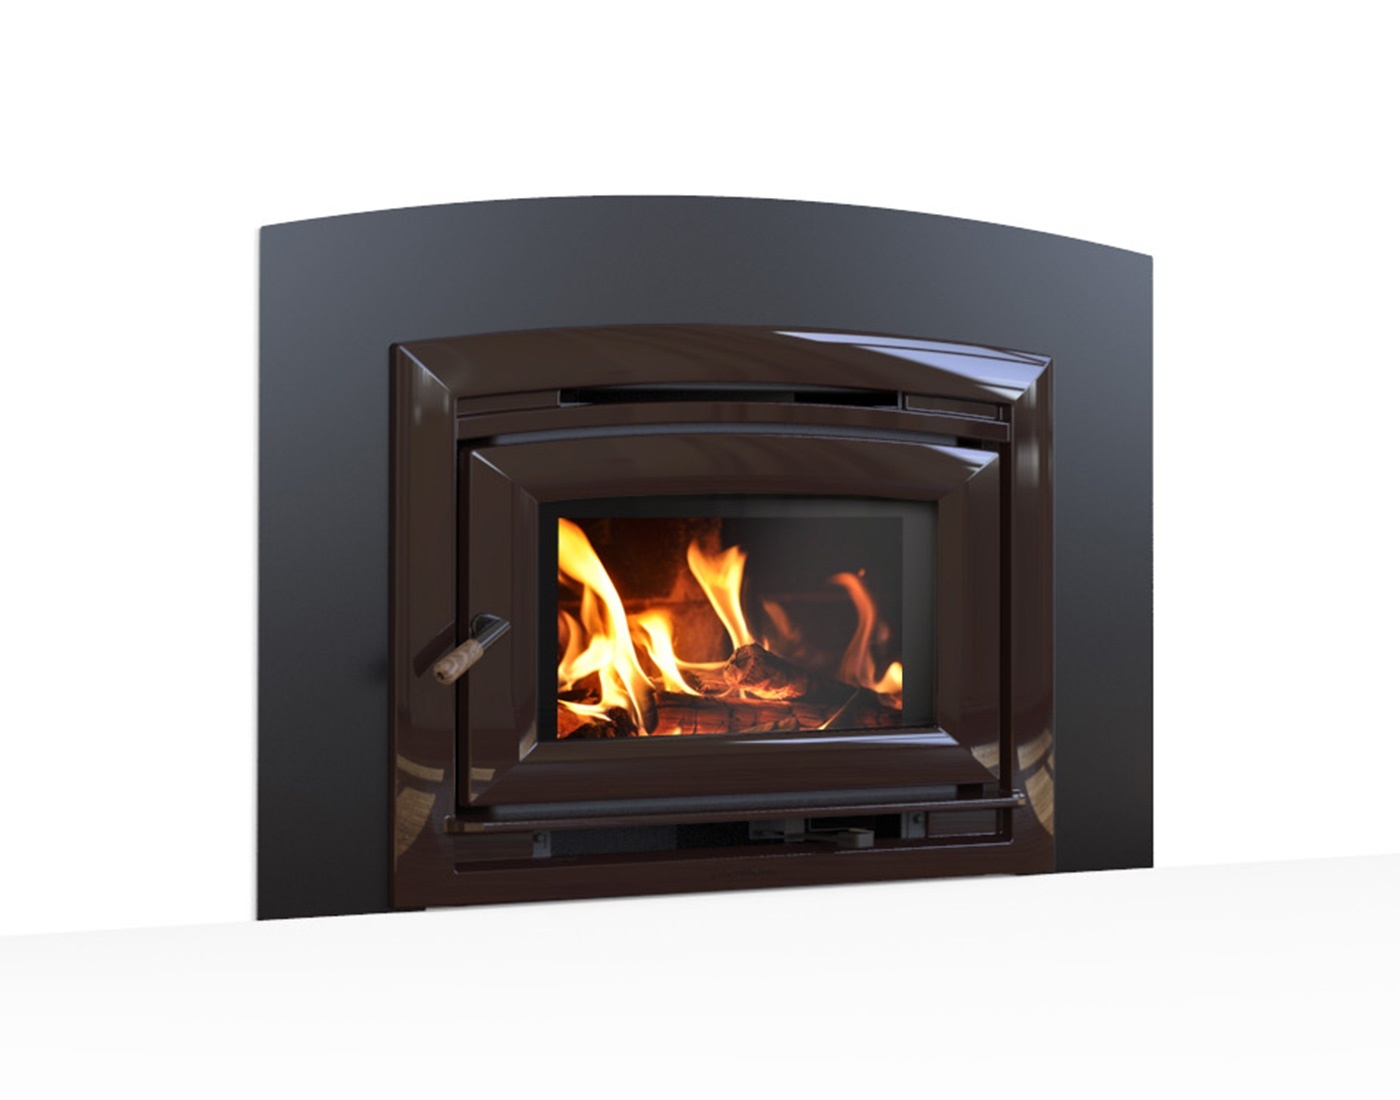 The Clydesdale direct wood stove